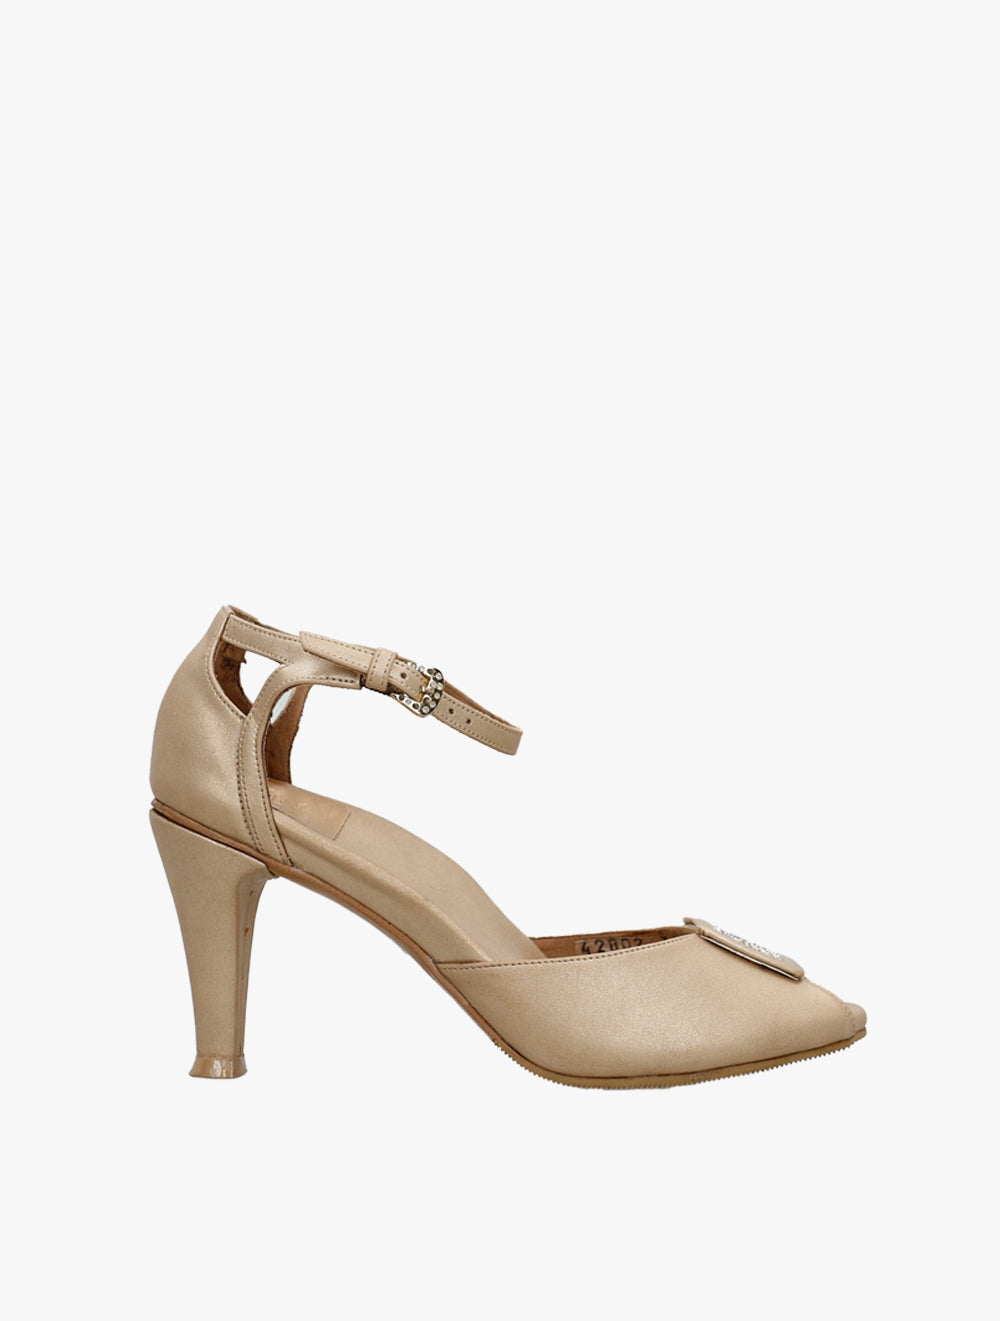 WIMO
Orthopaedic - Gold Ankle Strap - High Stilletto